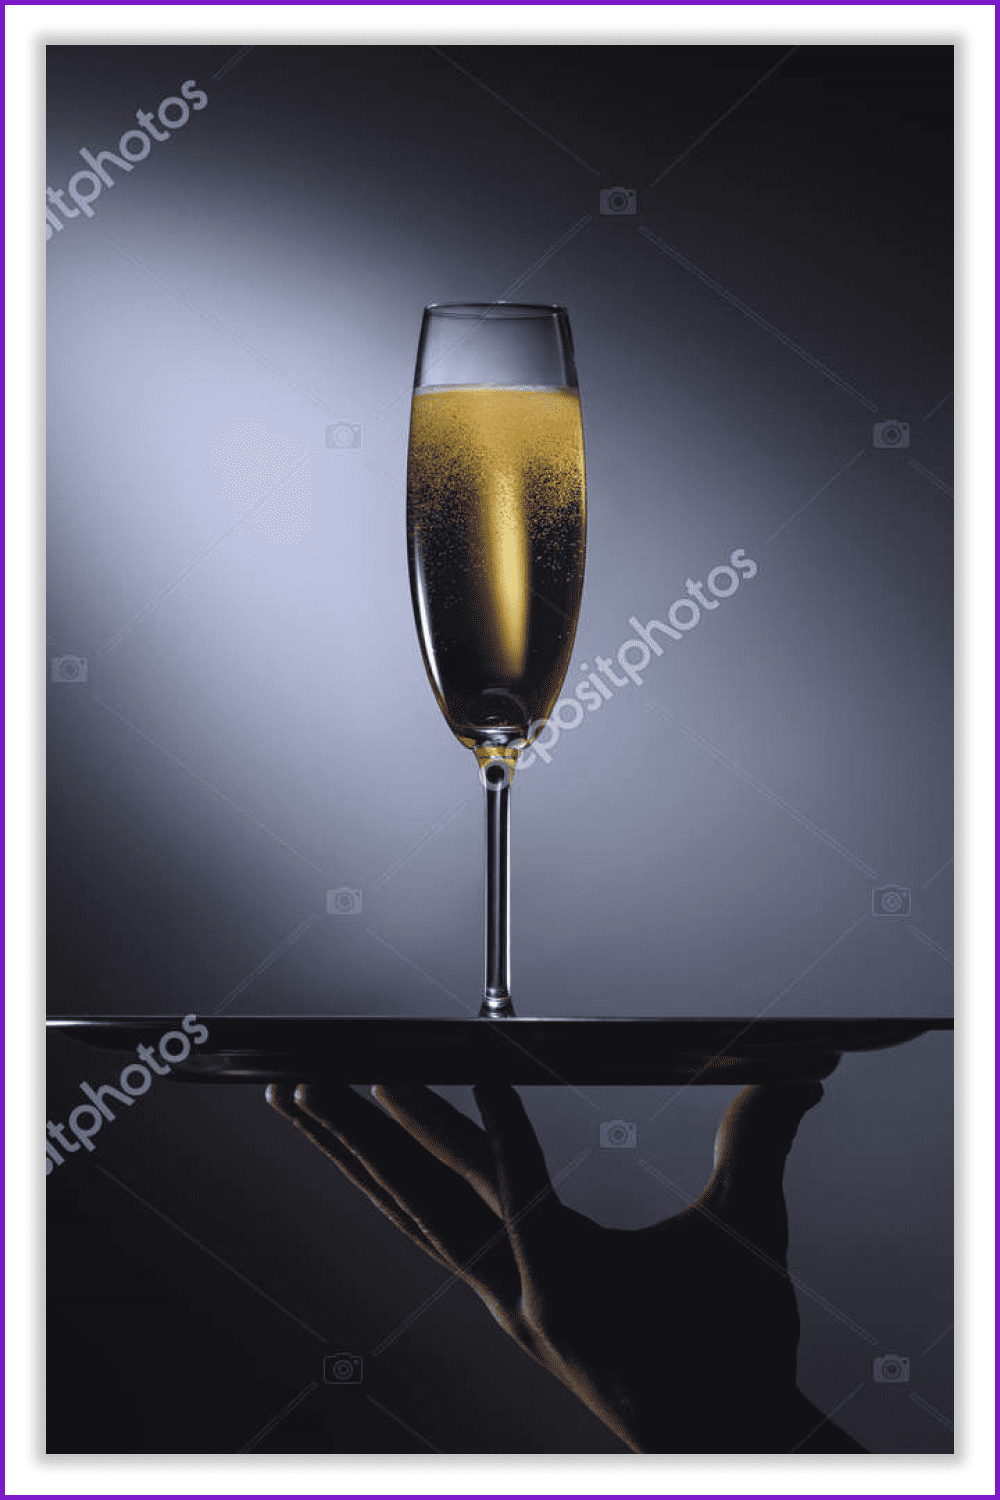 Glass of champagne on a tray on a dark background.